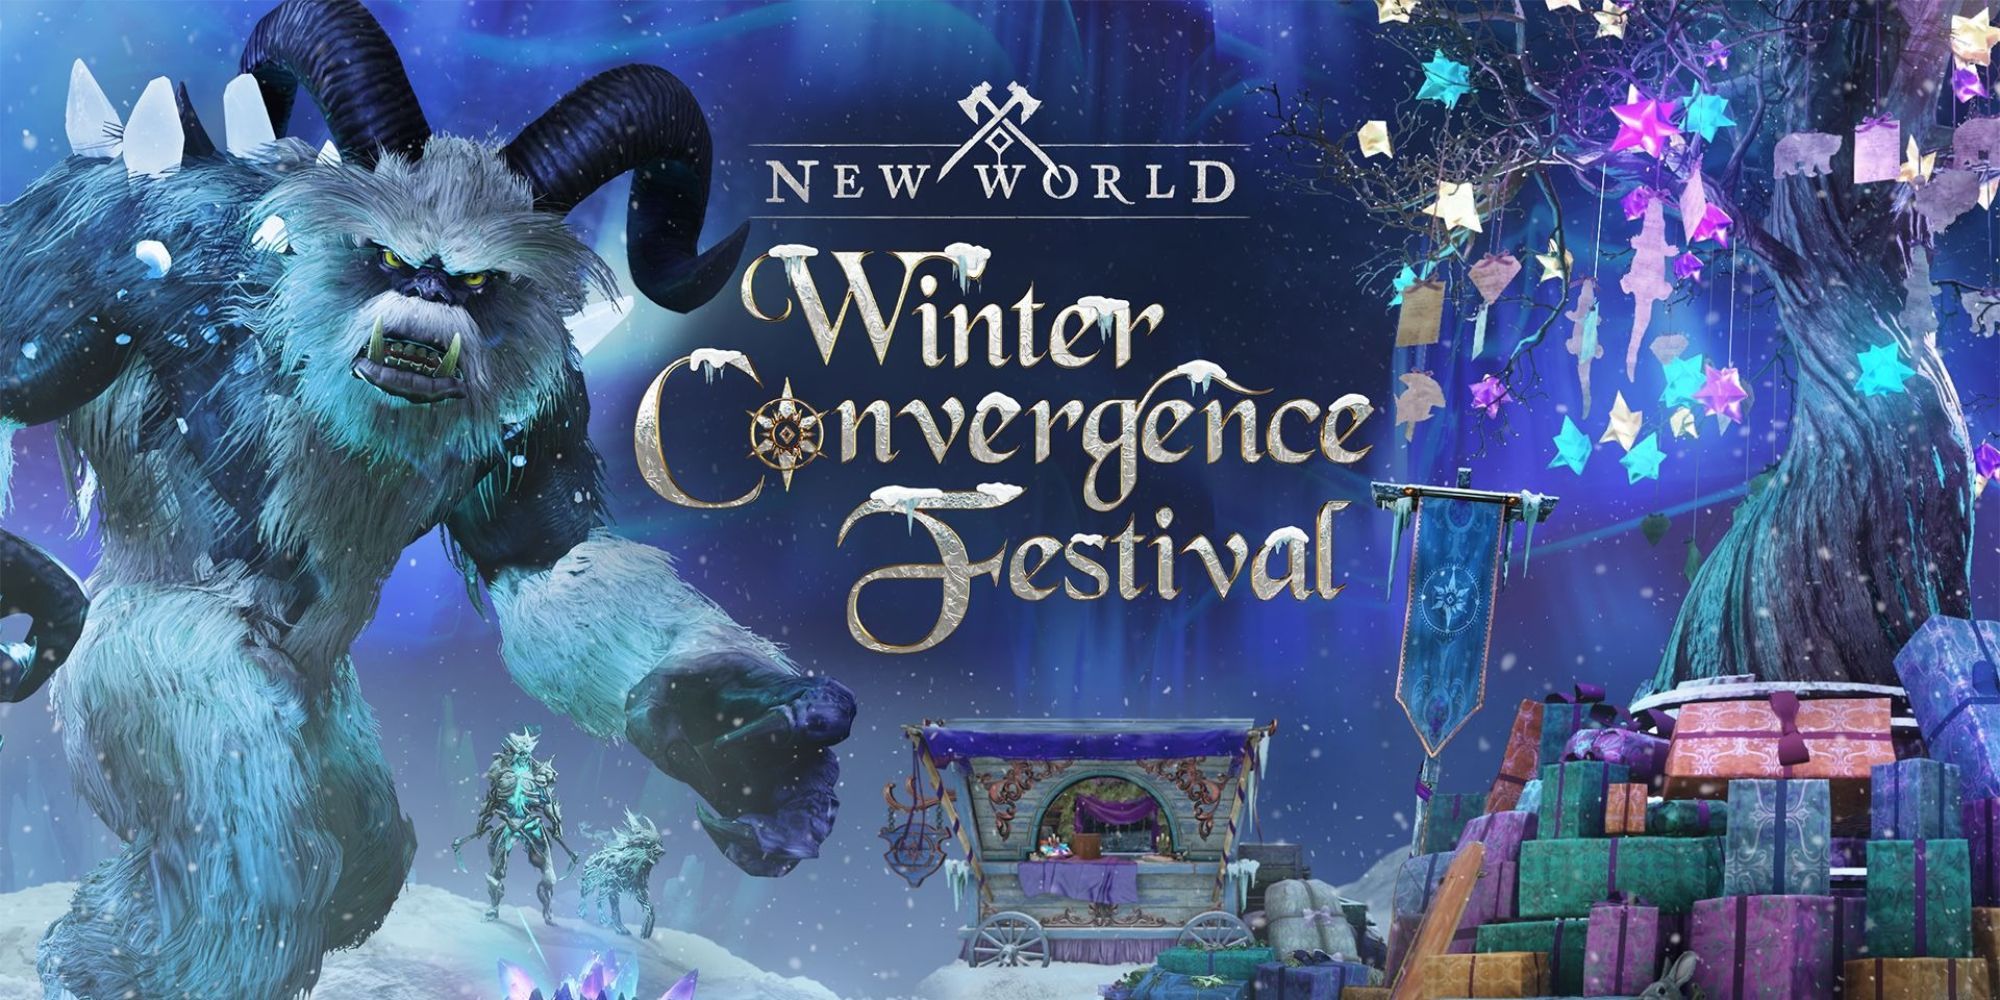 New World December Update Includes Winter Convergence Festival, End